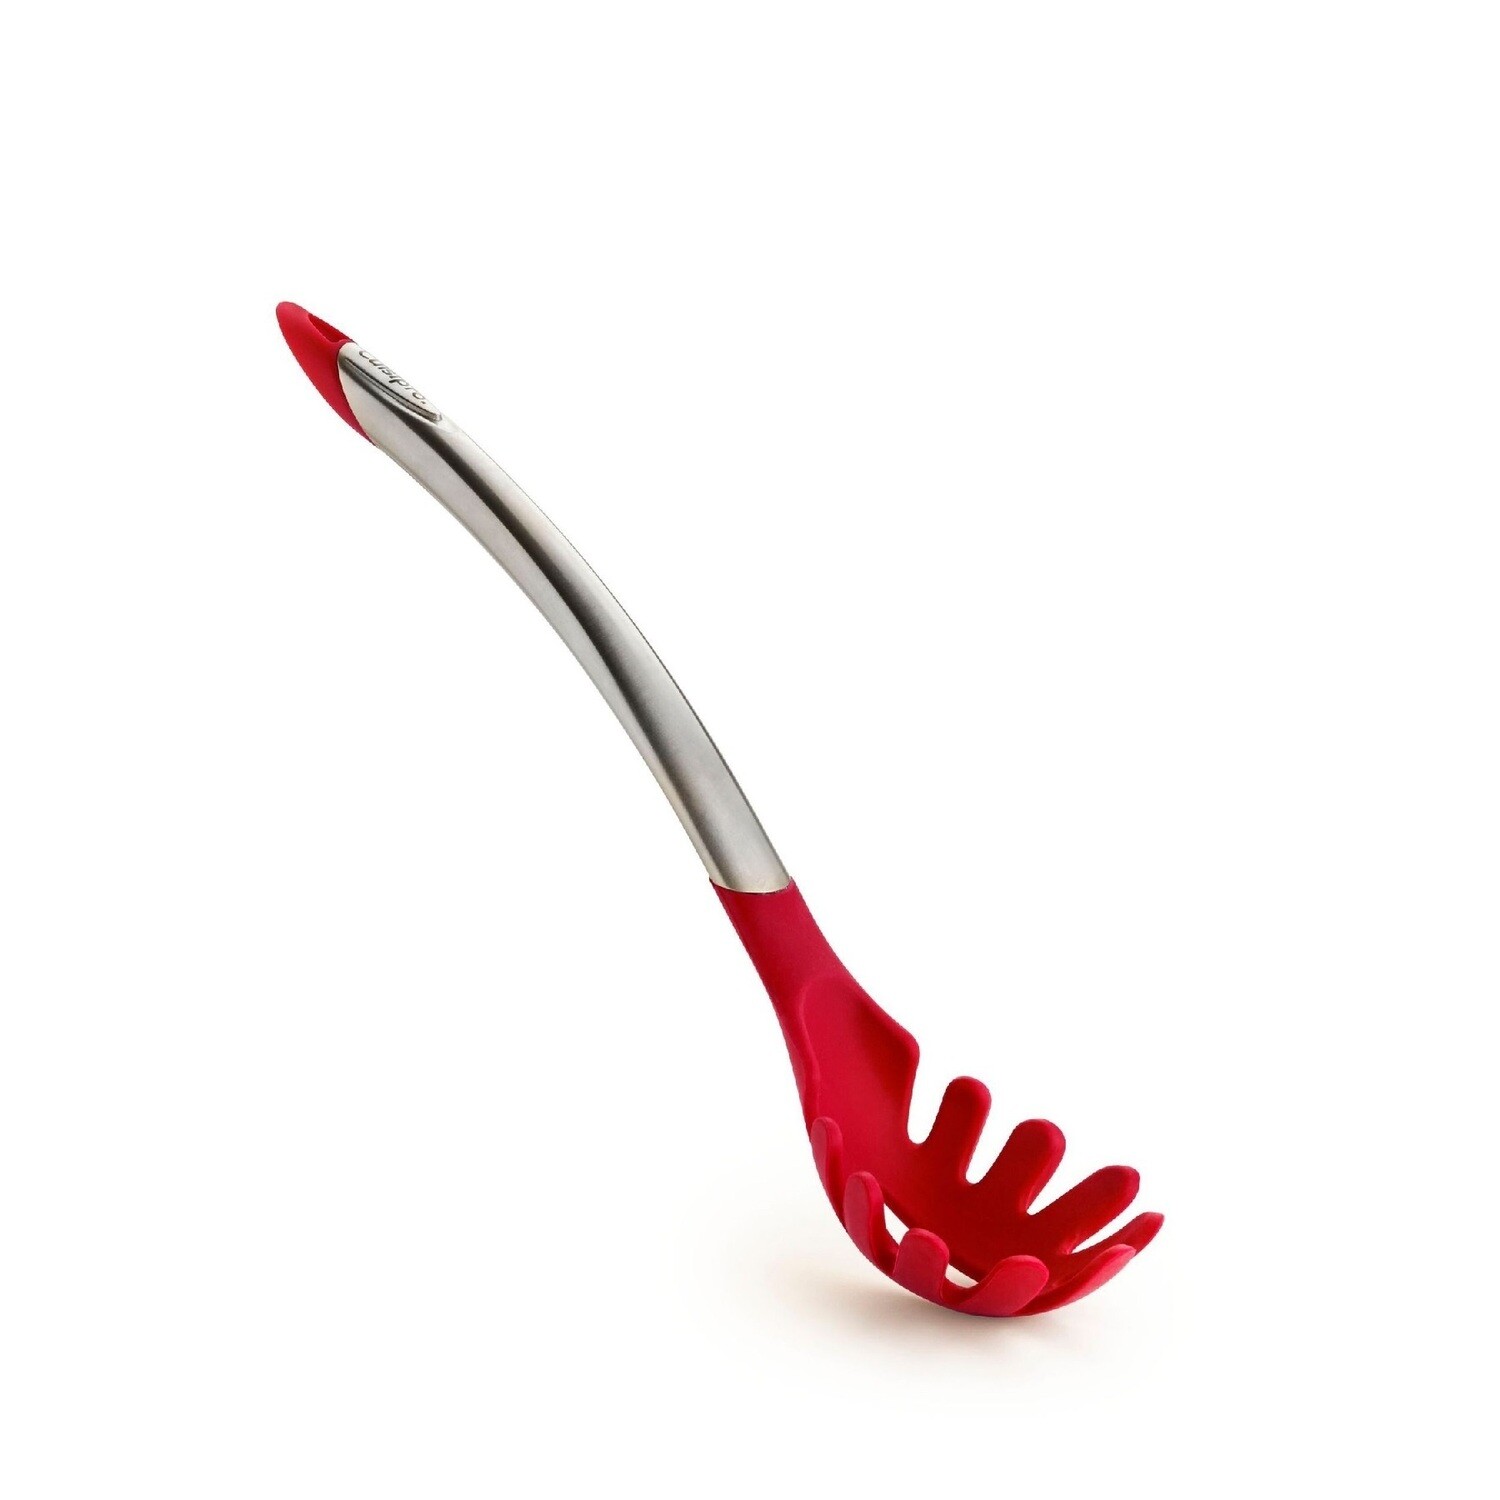 CUISIPRO 'silicone tools' pastalepel 35cm rvs/silicone rood  PROMO 24,95 -20%